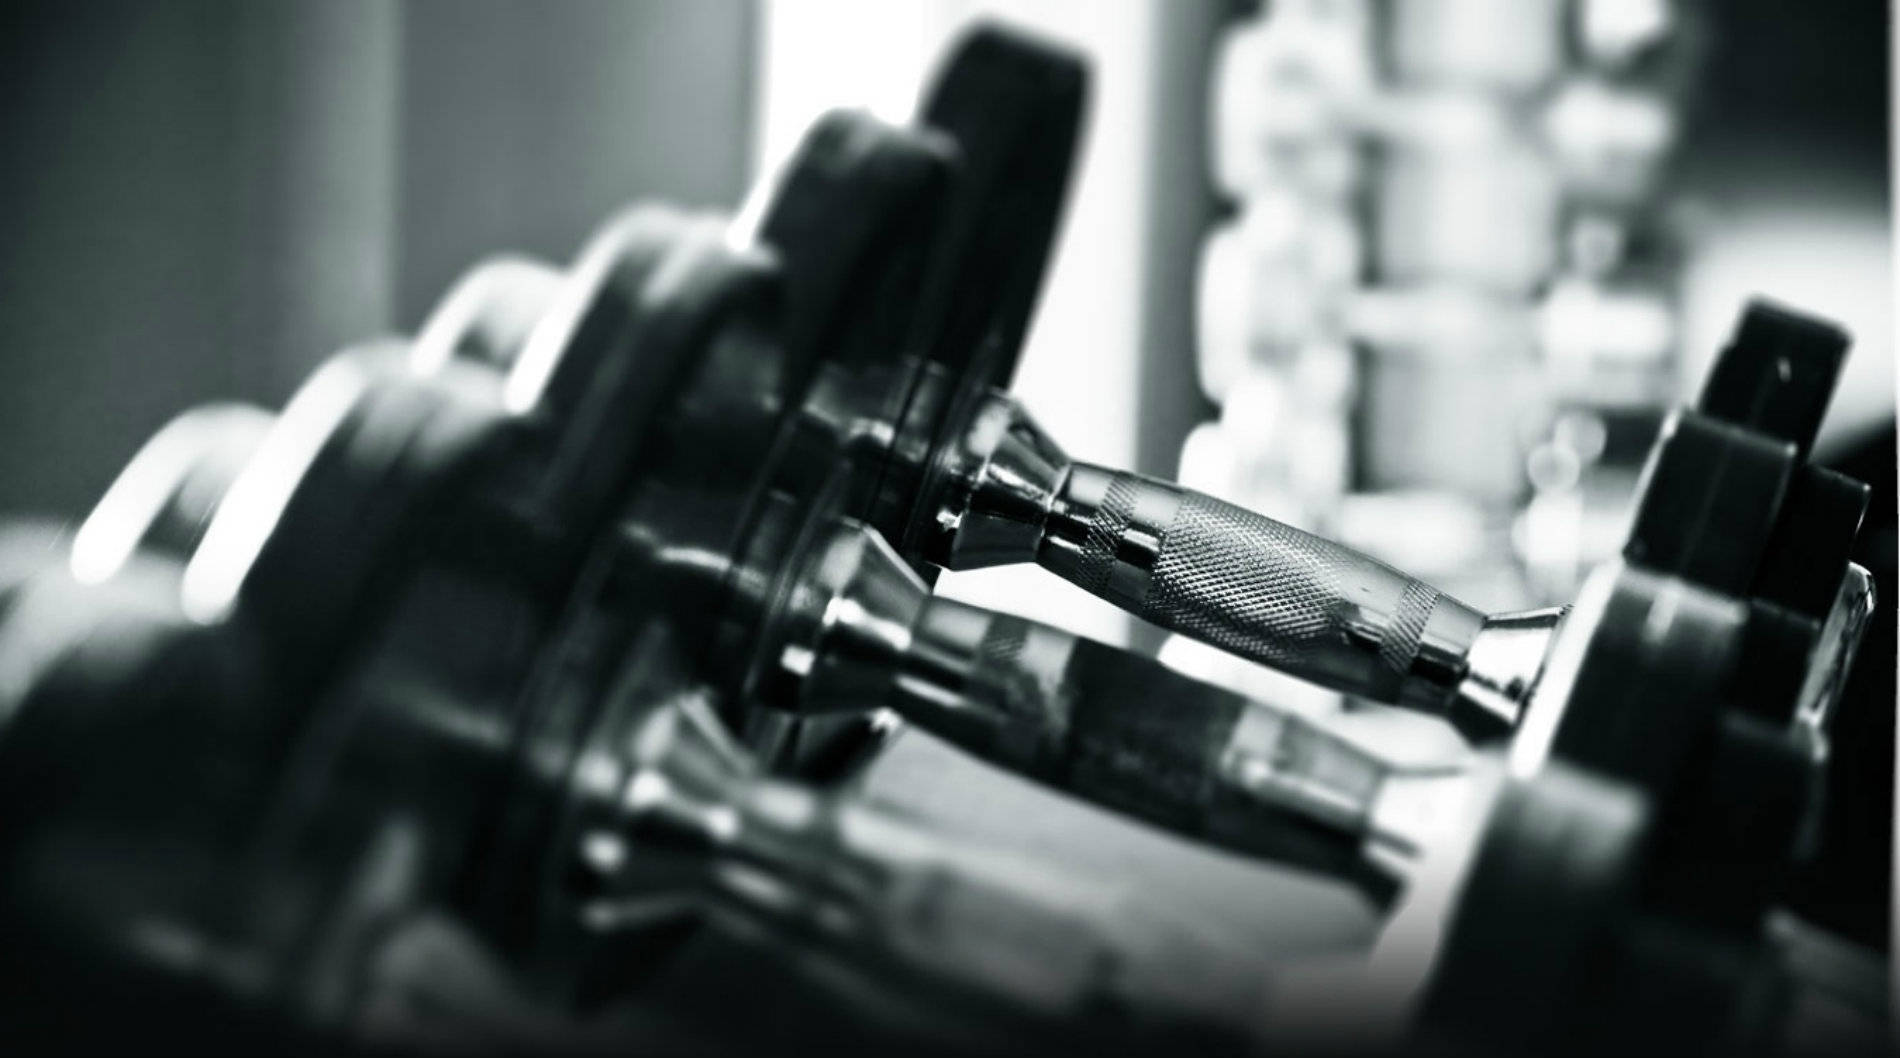 Grayscale Dumbbells Fitness Photography